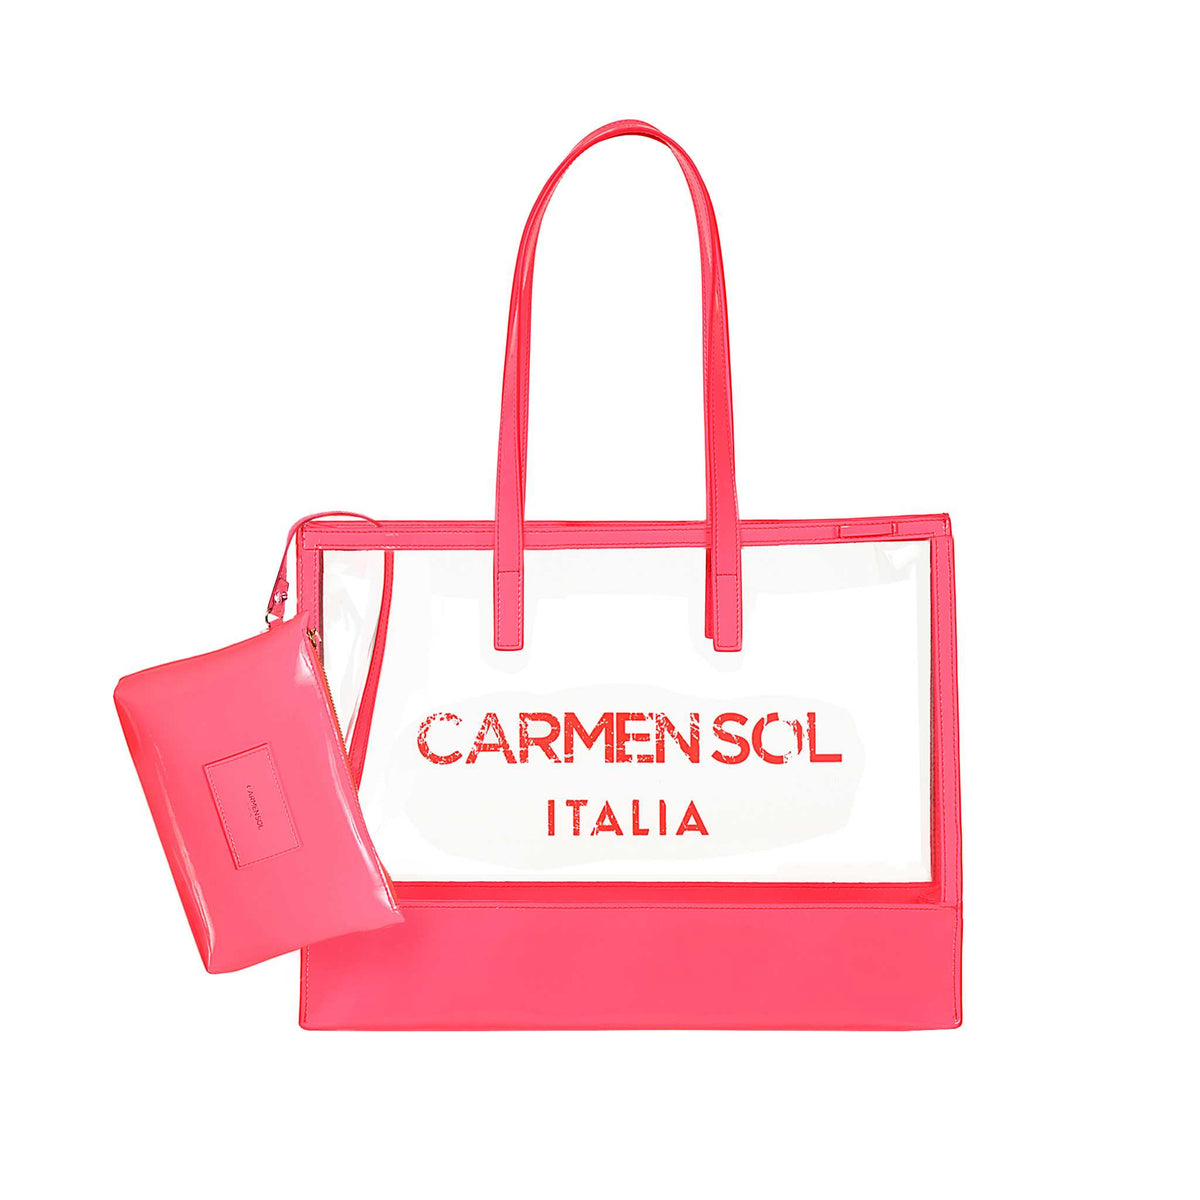 Taormina beach bags for women which are recyclable in color neon pink